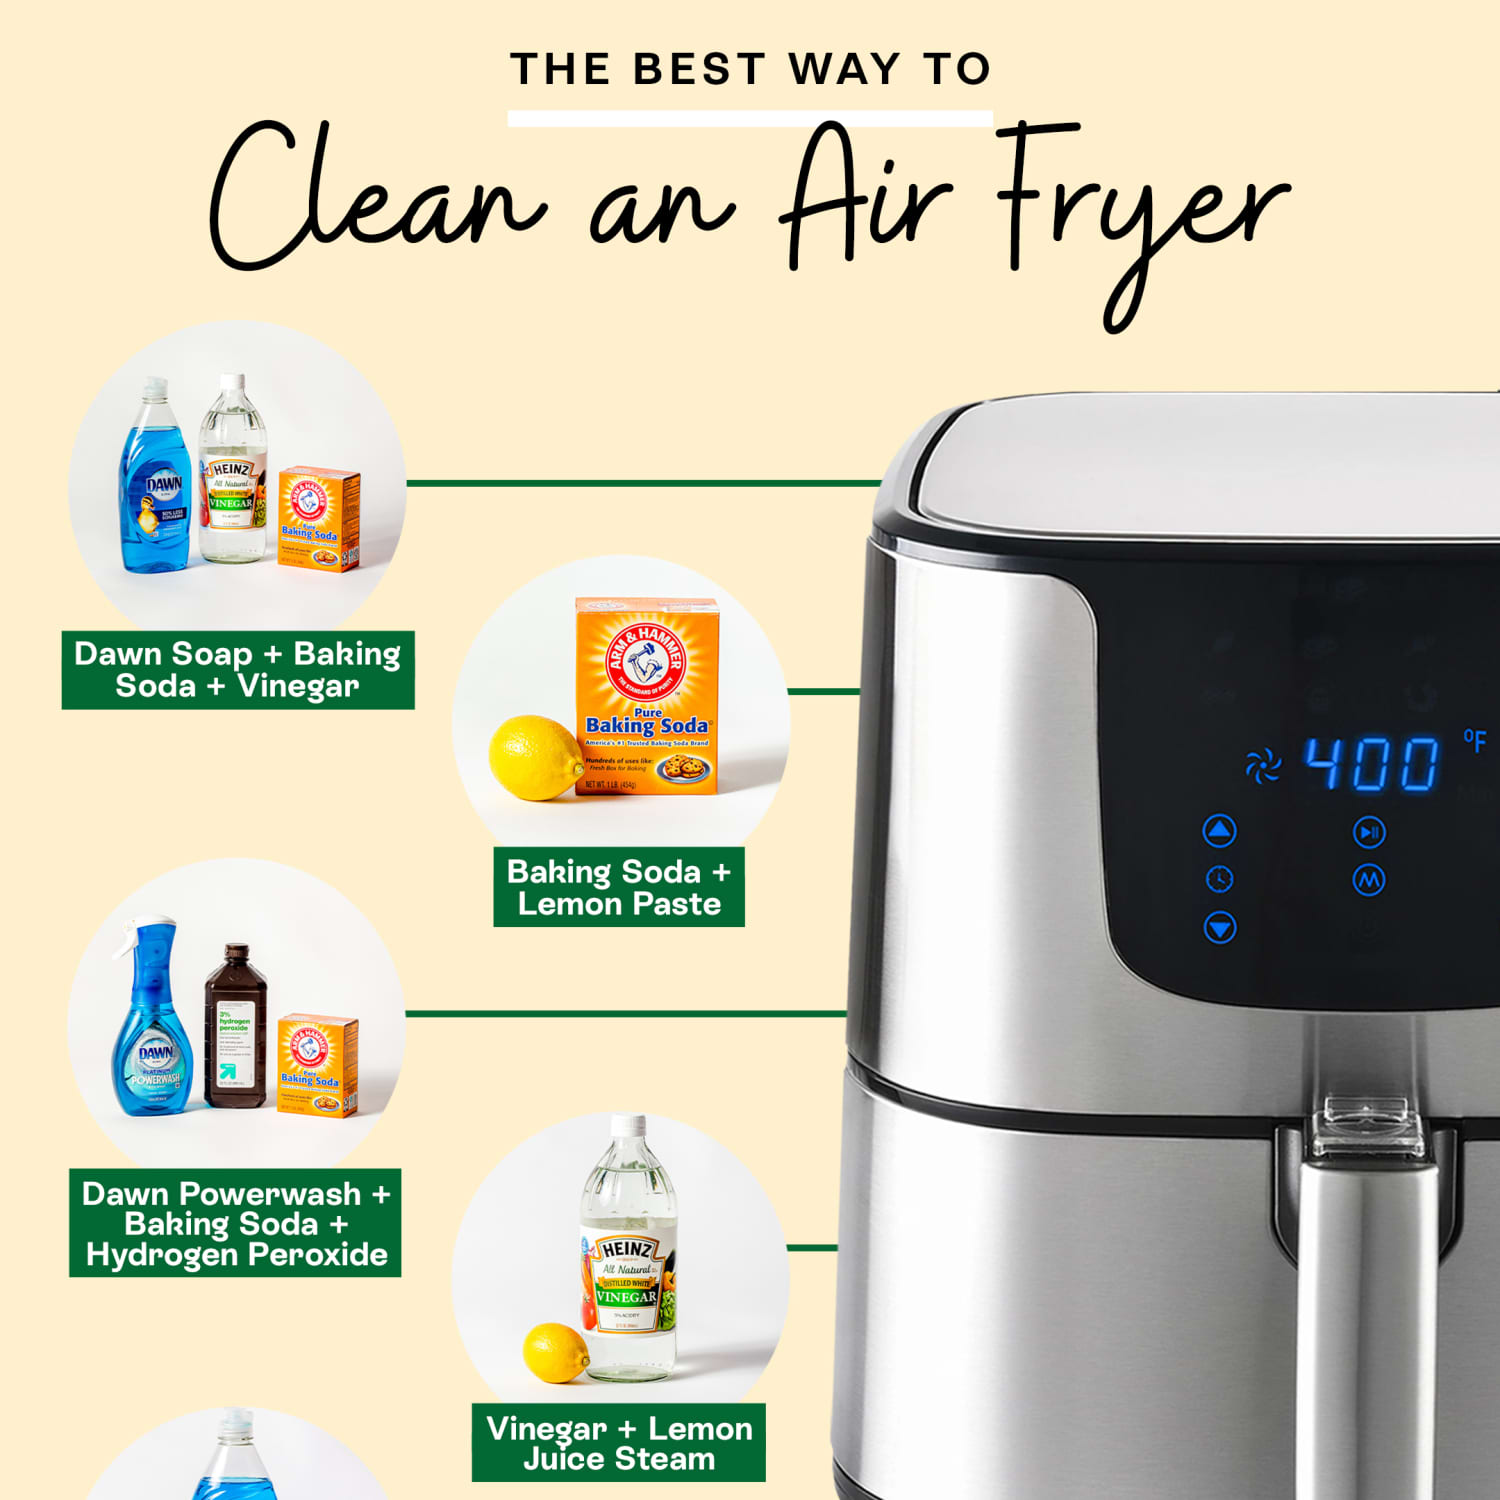 How to Clean an Air Fryer, Chemex, and Other Tricky Kitchen Tools